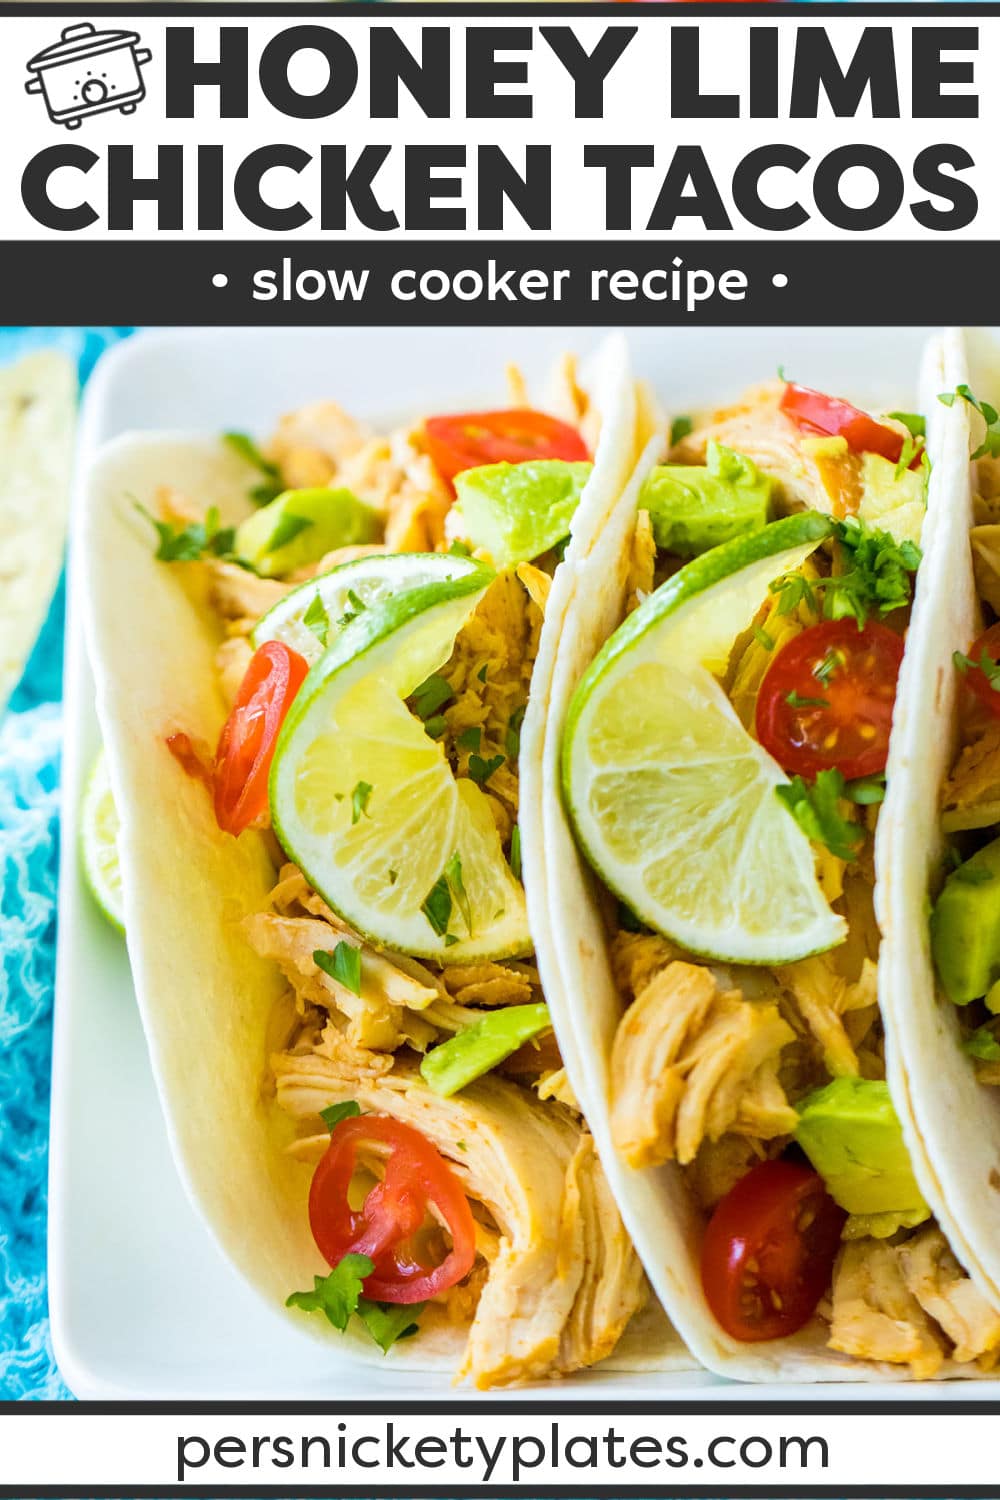 The meat in these slow cooker honey lime chicken tacos is tender, juicy, and full of flavor. With just 5 minutes of prep time, the crockpot does the heavy lifting, and because there are so few ingredients involved, you may already have what you need on hand! Top with your favorite toppings and enjoy a bright and zesty new taco recipe!  | www.persnicketyplates.com